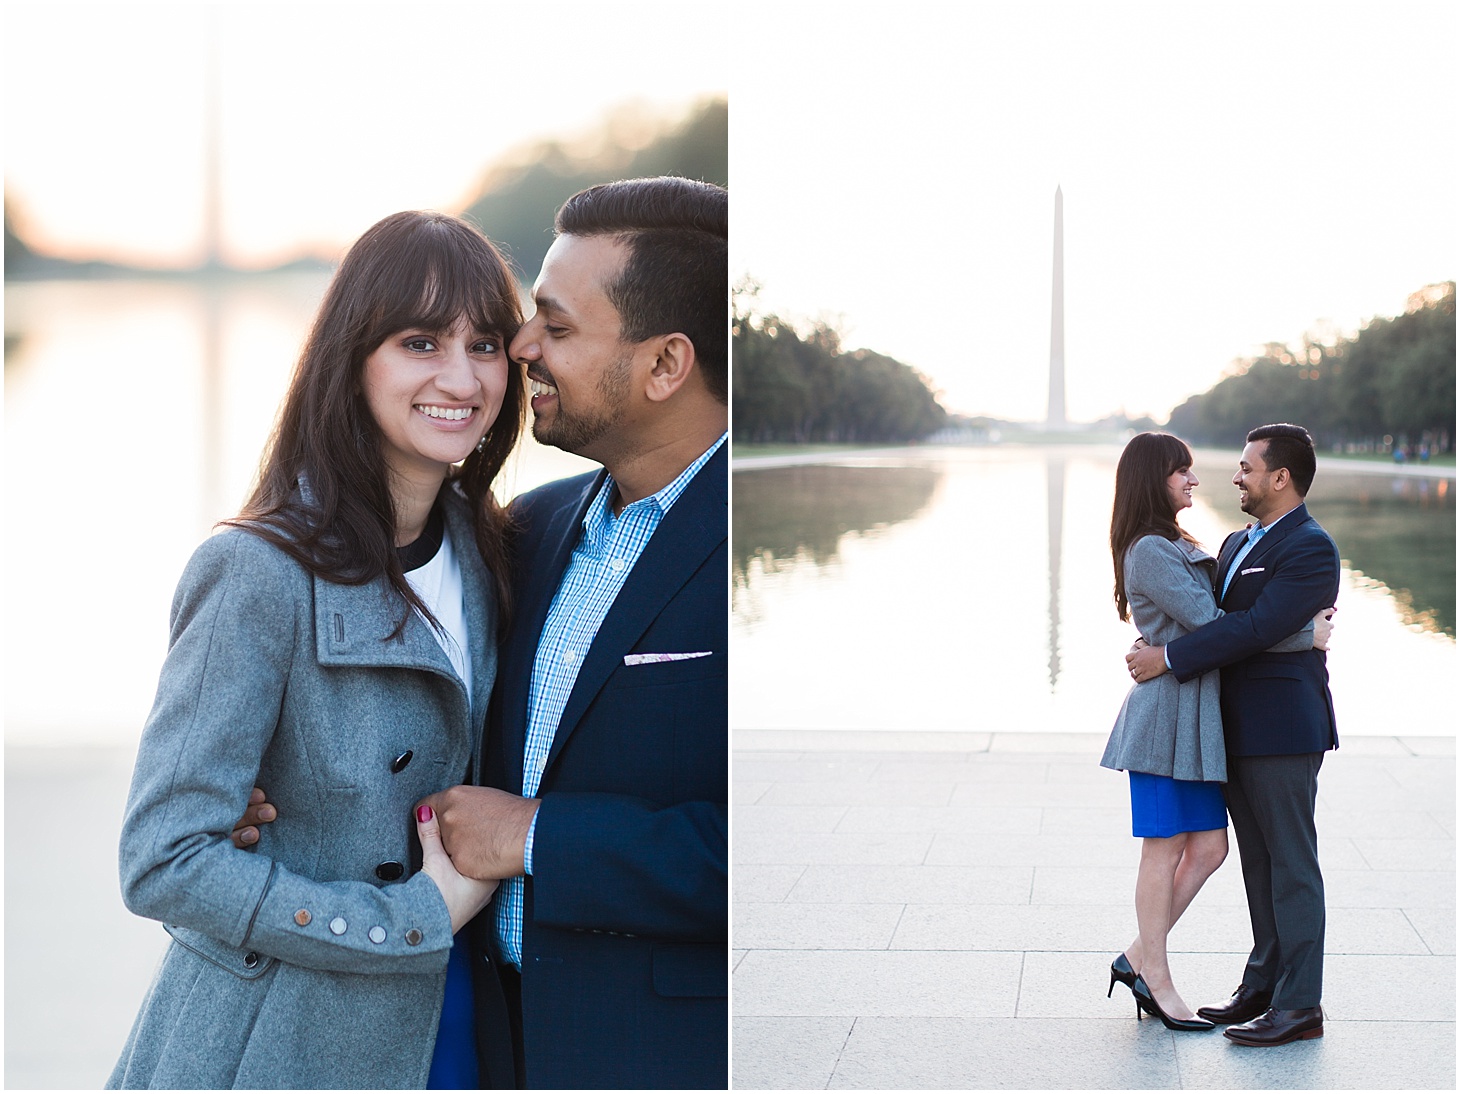 Sunrise Engagement Session at Lincoln Memorial | Colorful Fall Engagement Session in Georgetown | Sarah Bradshaw Photography